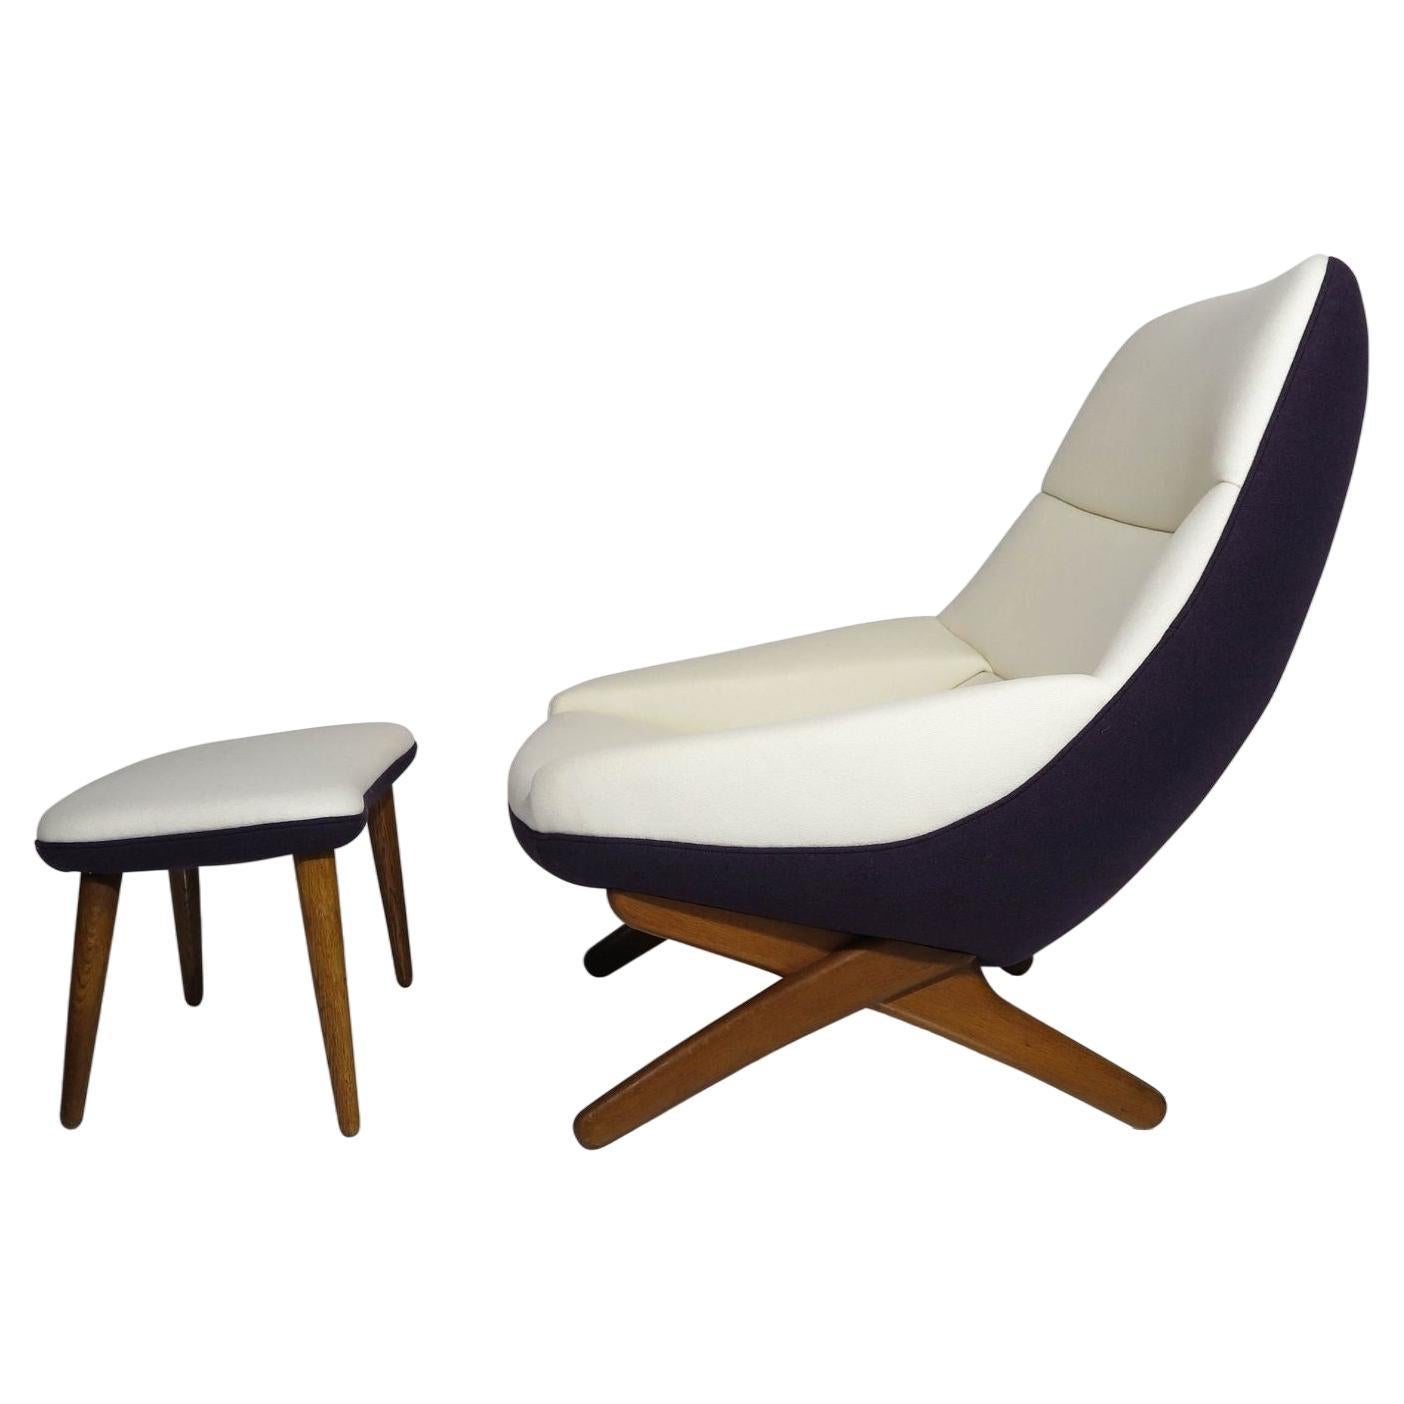 Illum Wikkelsø Danish lounge chair and ottoman, produced by A. Mikael Laursen, circa 1959, Denmark. Model ML91. Reupholstered in aubergine and off-white wool, and supported by aged oak legs.
Measurements
W 34